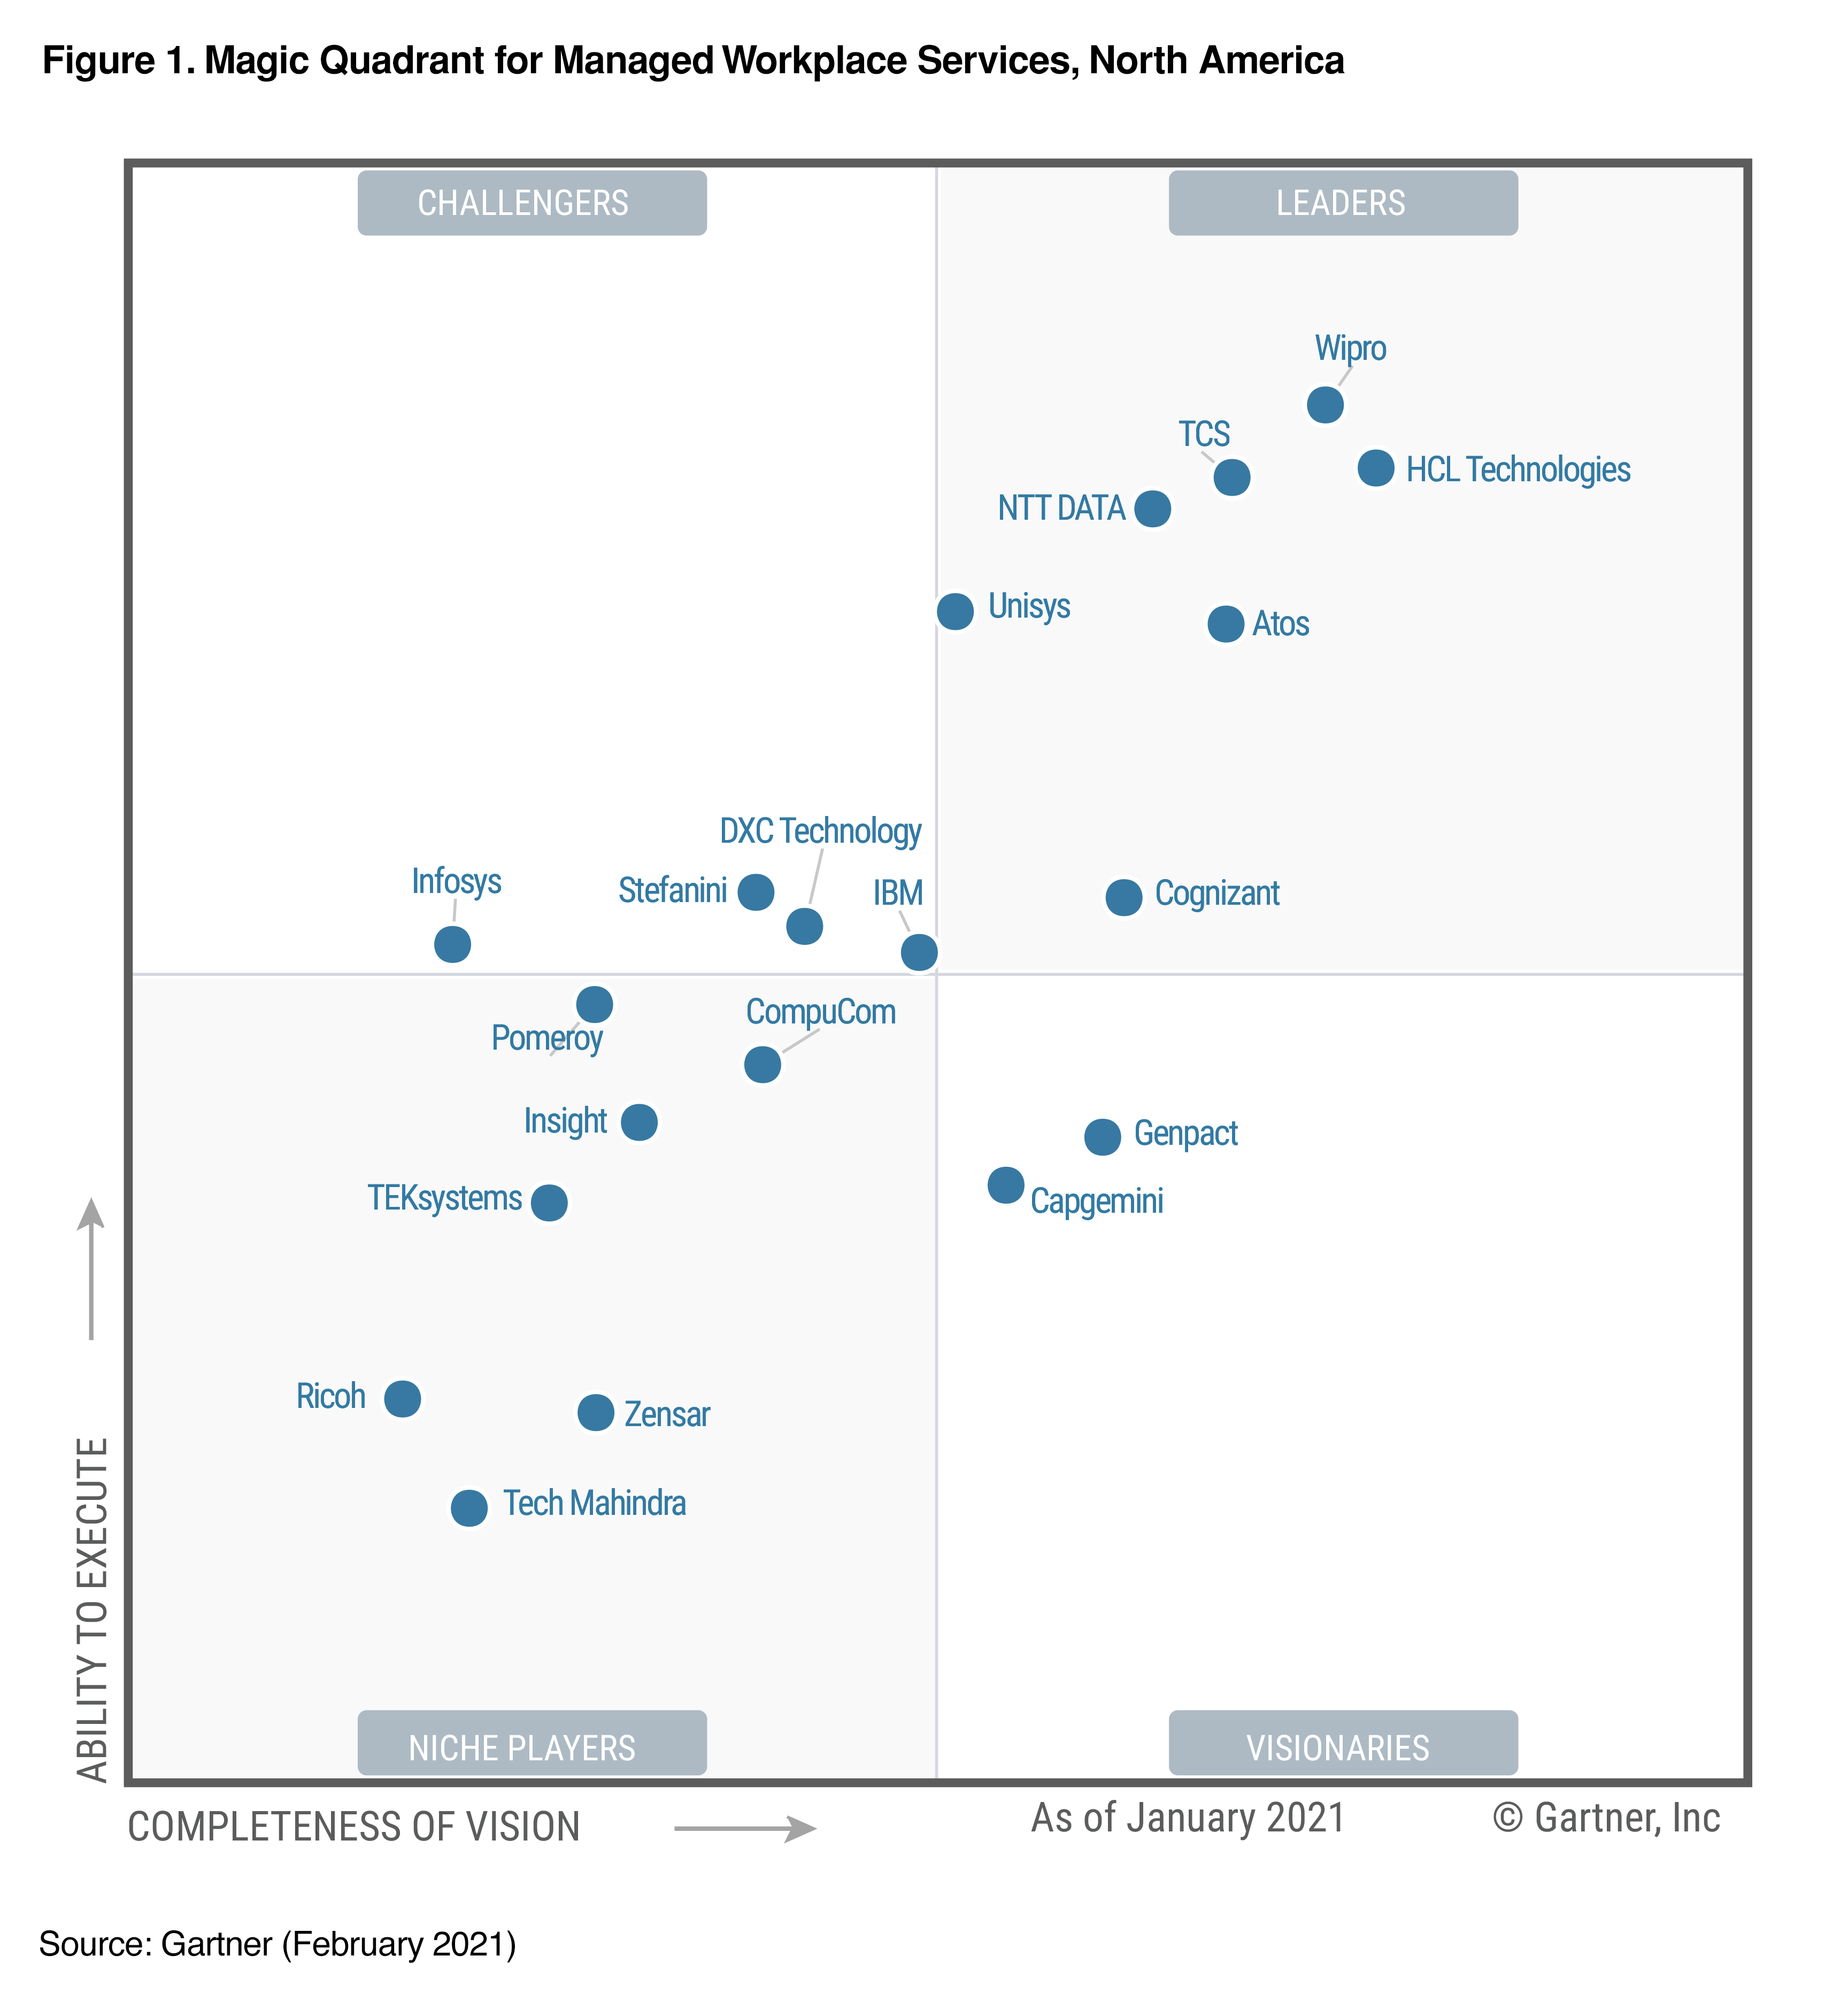 Wipro Recognized as a ‘Leader’ in 2021 Gartner Magic Quadrant for Managed Workplace Services, North America, for the Fourth Year in a Row